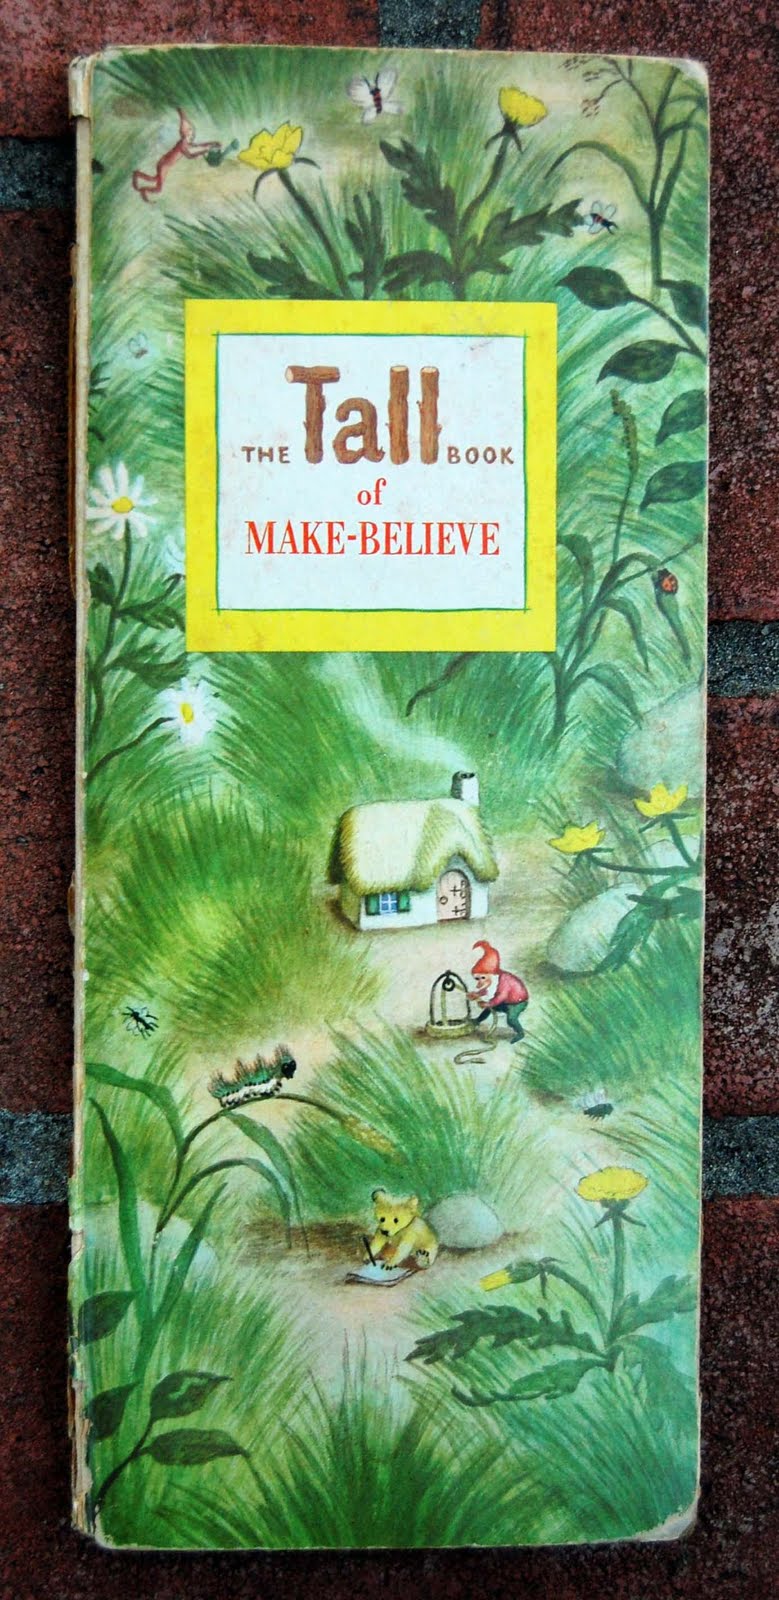 Vintage Kids' Books My Kid Loves: The Tall Book of Make-Believe